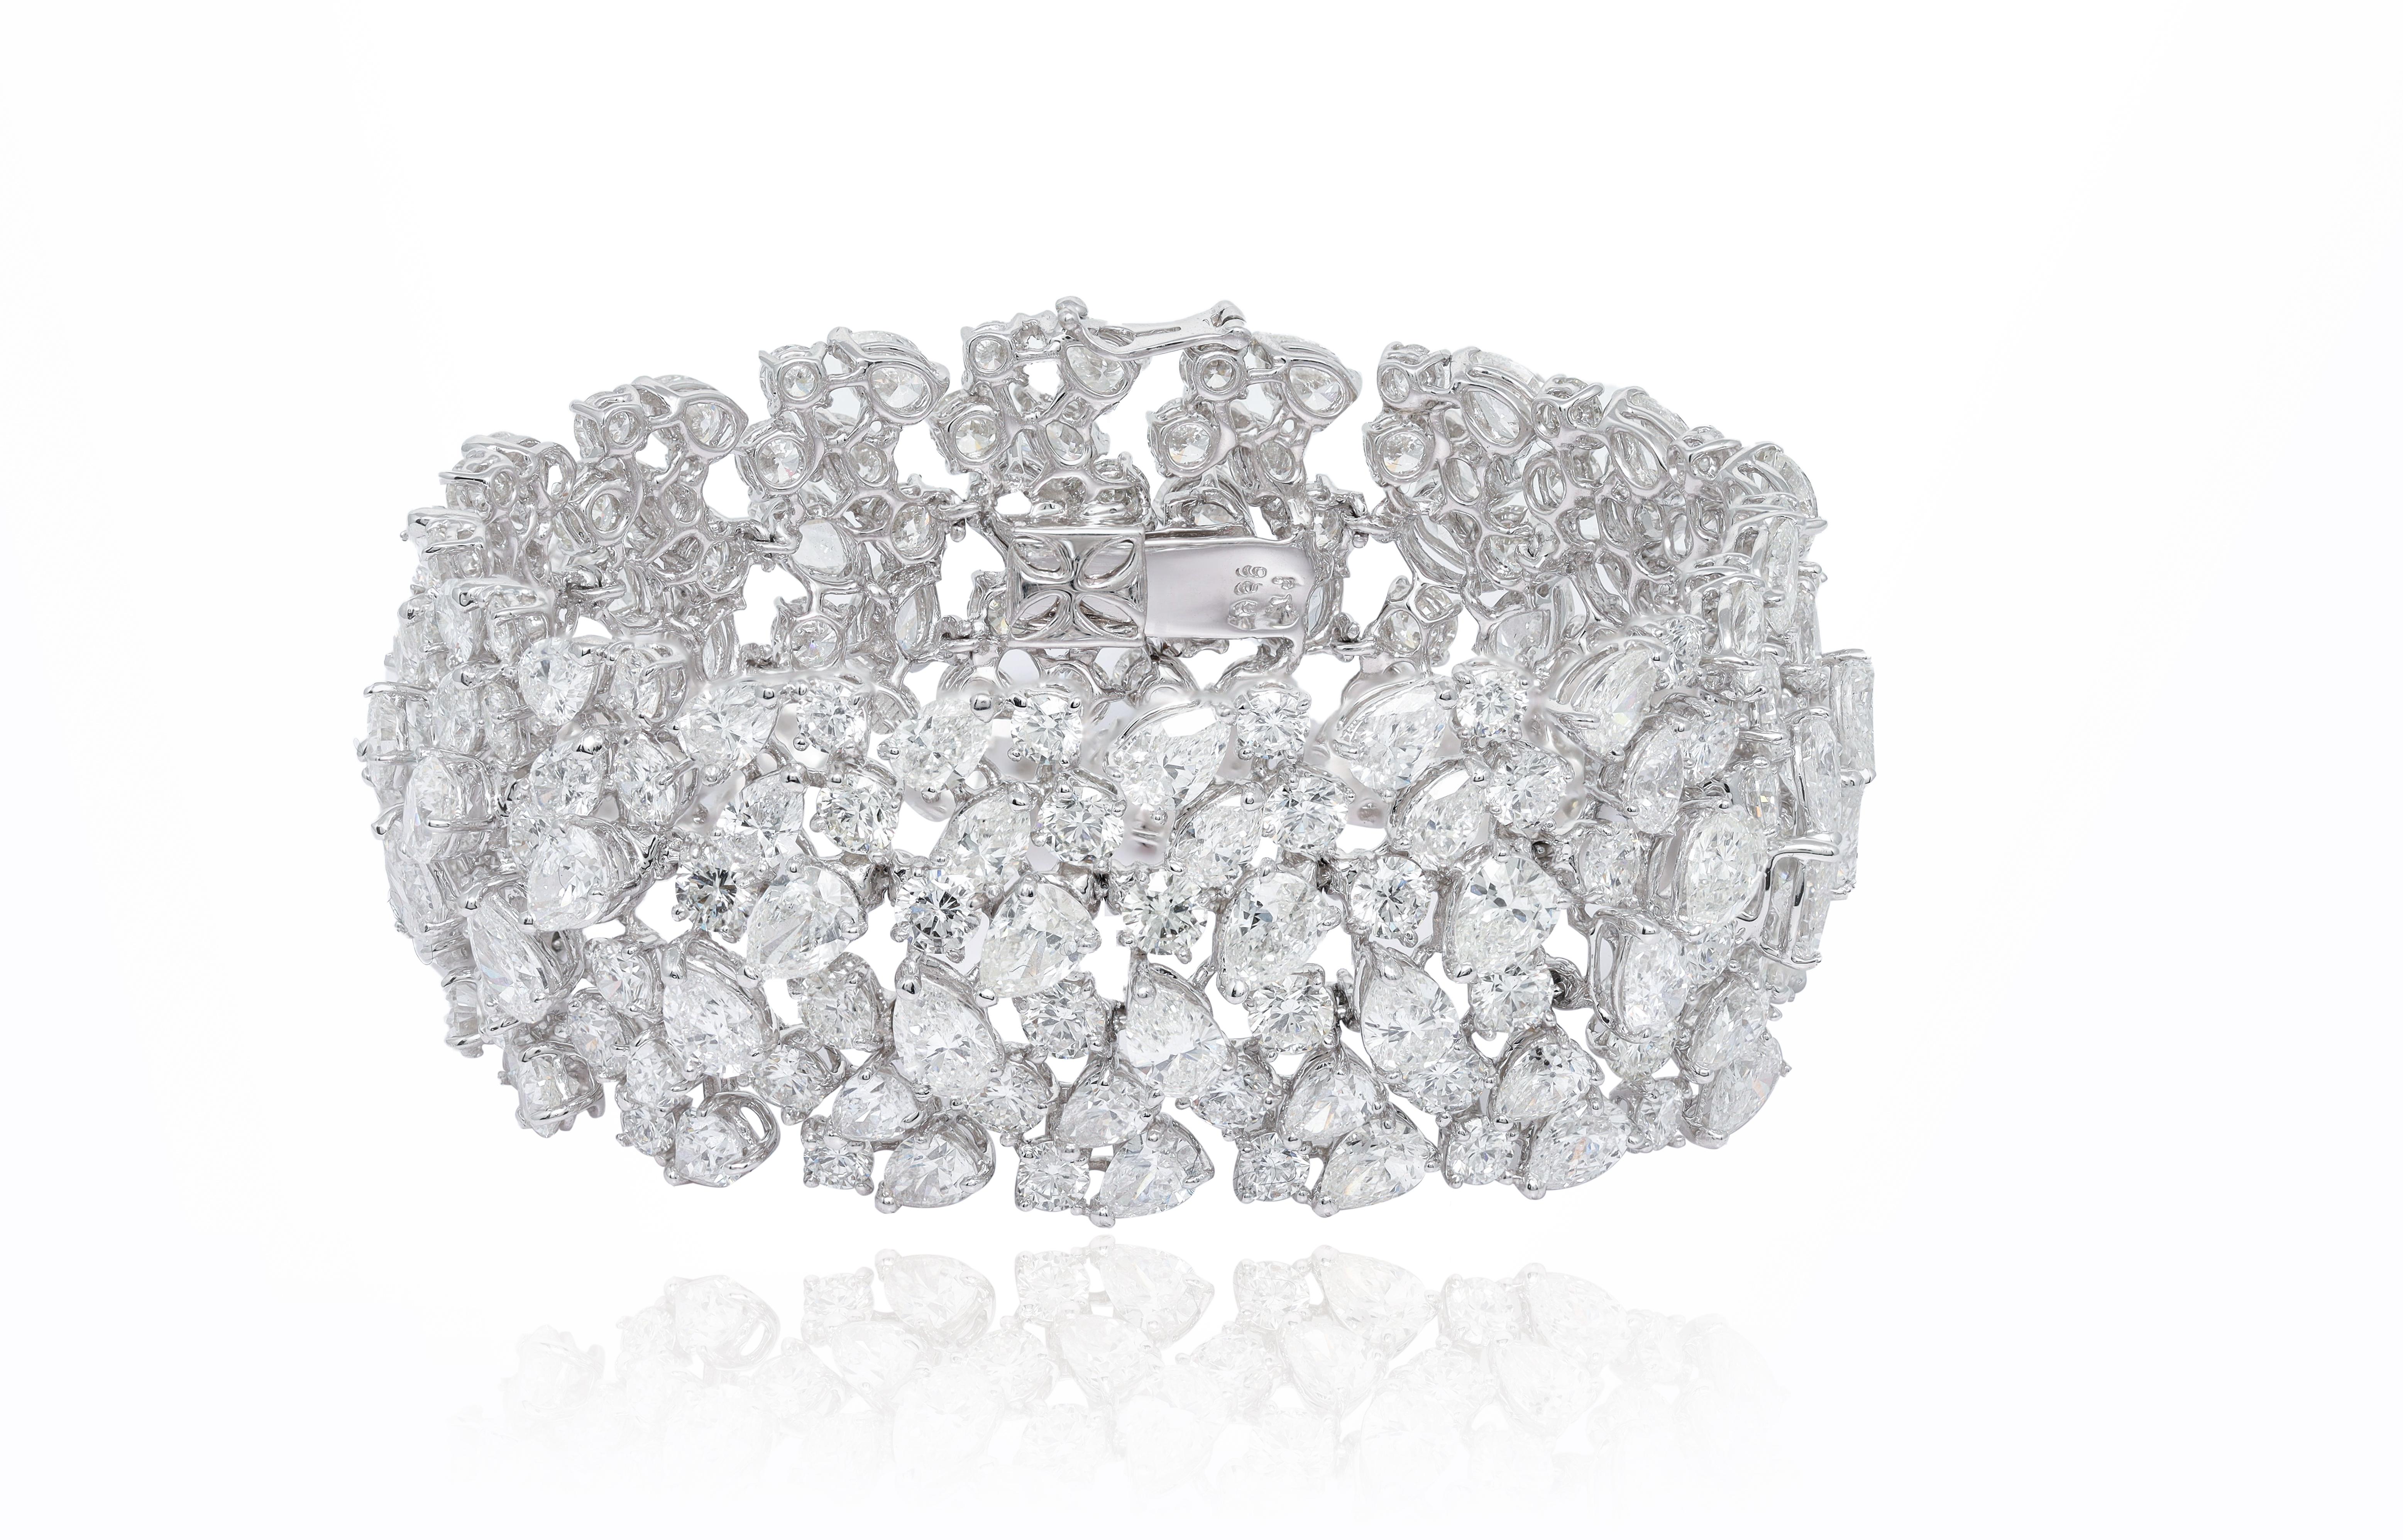 Platinum diamond fashion bracelet featuring clusters of 52.00 cts pear and round diamonds
Diana M. is a leading supplier of top-quality fine jewelry for over 35 years.
Diana M is one-stop shop for all your jewelry shopping, carrying line of diamond